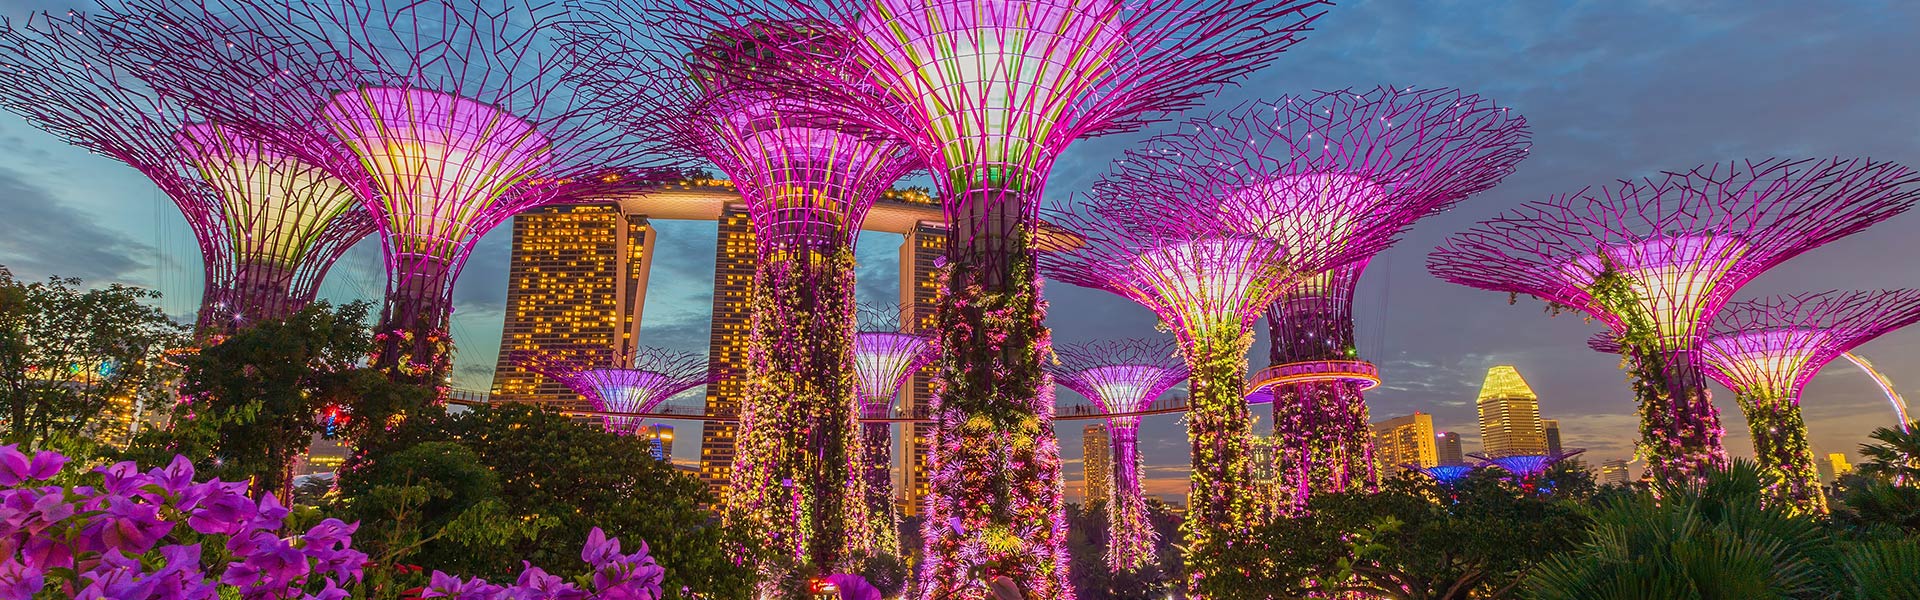 Gardens by the Bay | Singapore Attractions | Big Bus Tours